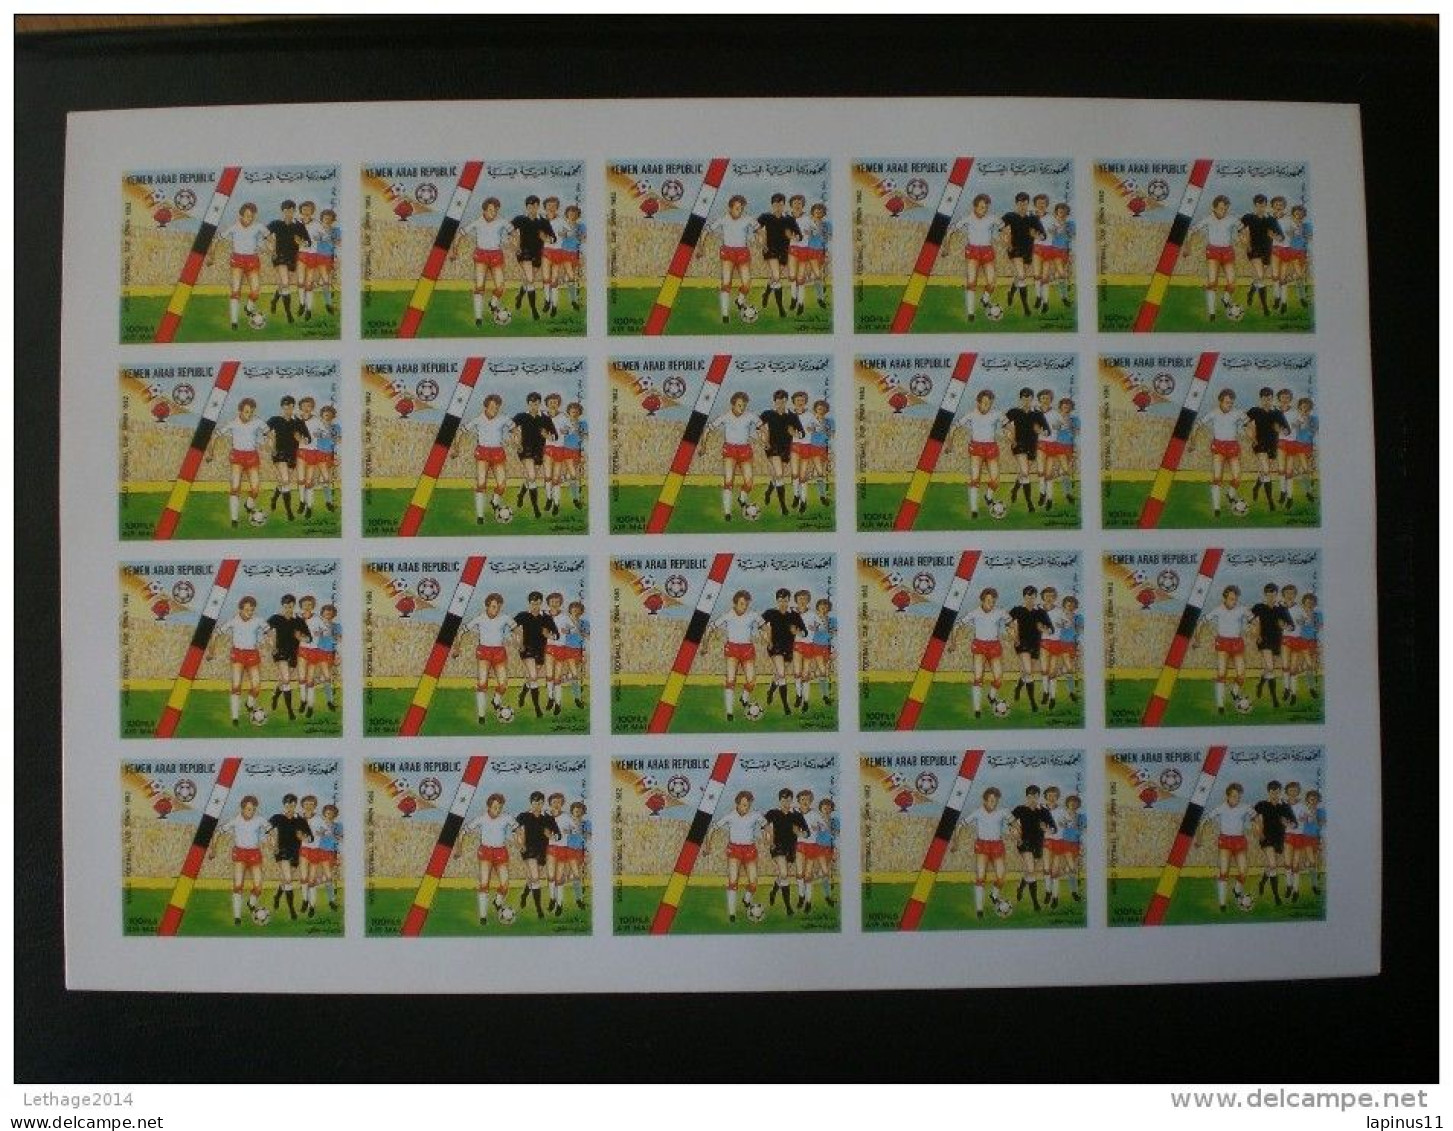 Yemen يمني ,Y,A,R " Espana 82 football world"sery complete imperf + perf sheets + imperf. sheet MNH + 9 PHOTO